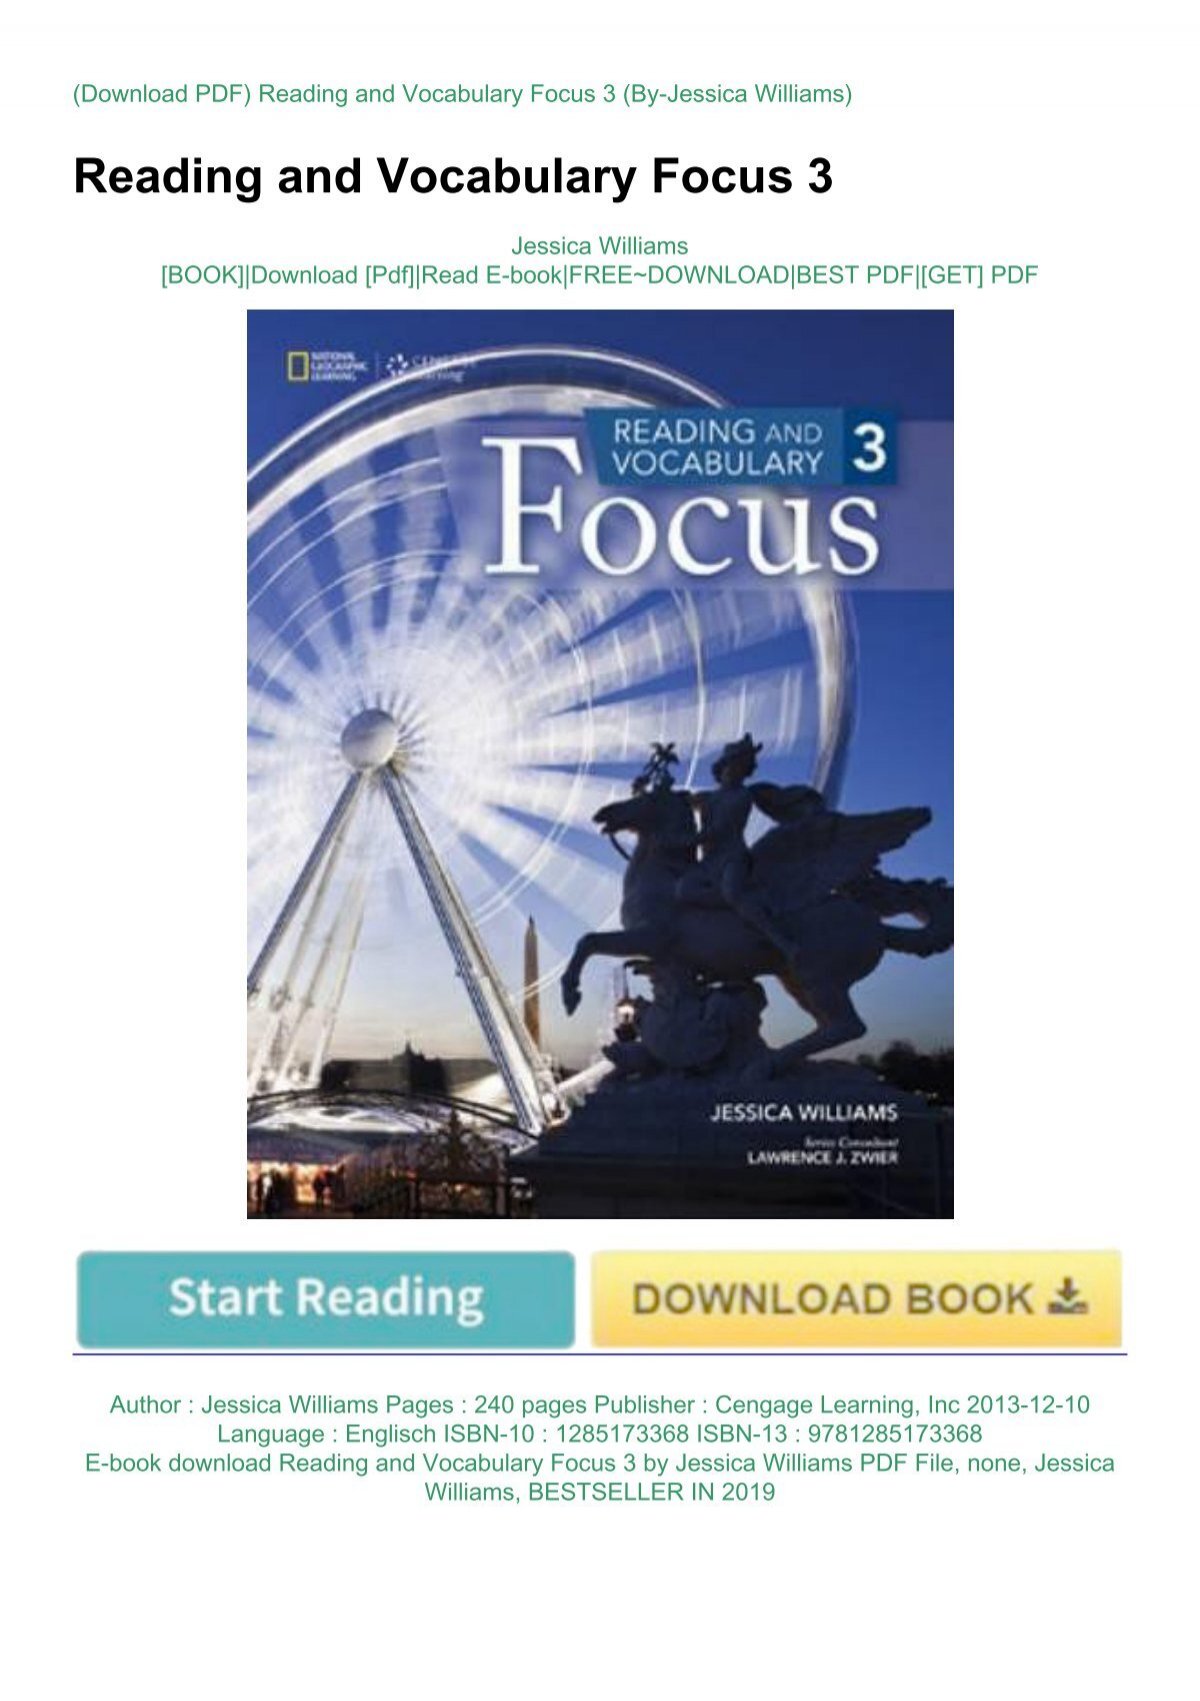 E-book download Reading and Vocabulary Focus 3 by Jessica Williams PDF File